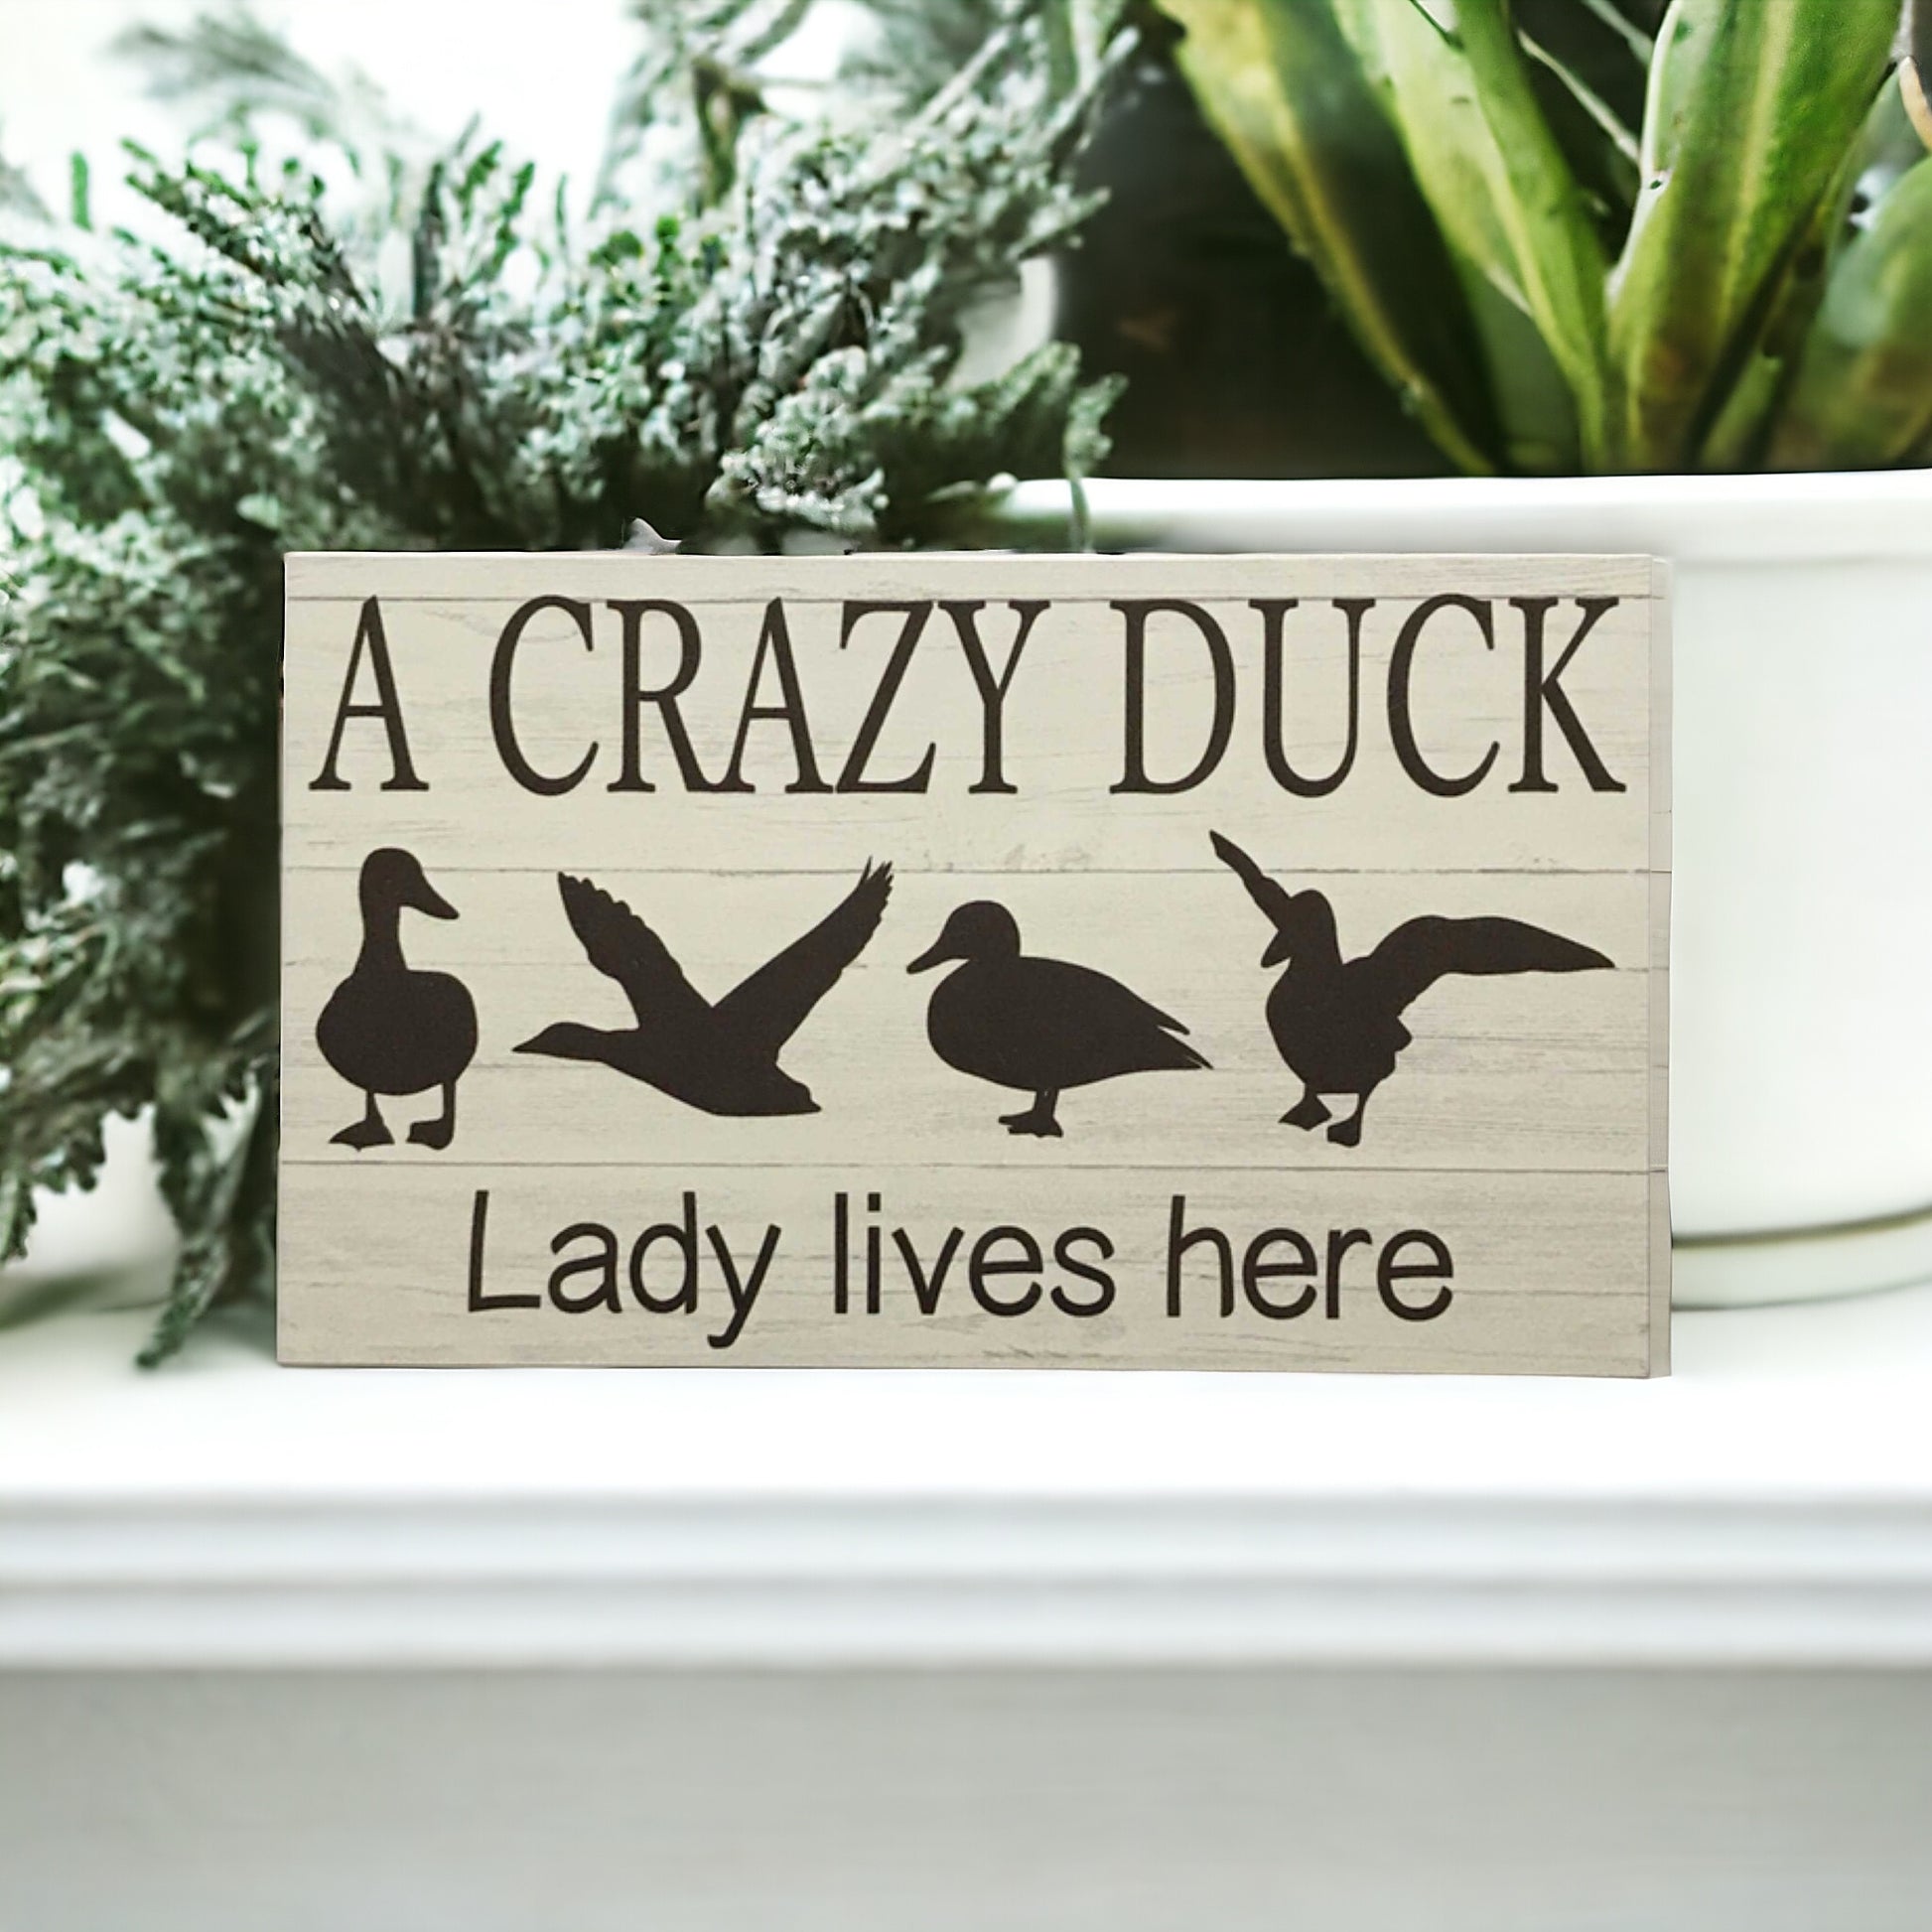 Crazy Duck Lady Lives Here Sign - The Renmy Store Homewares & Gifts 